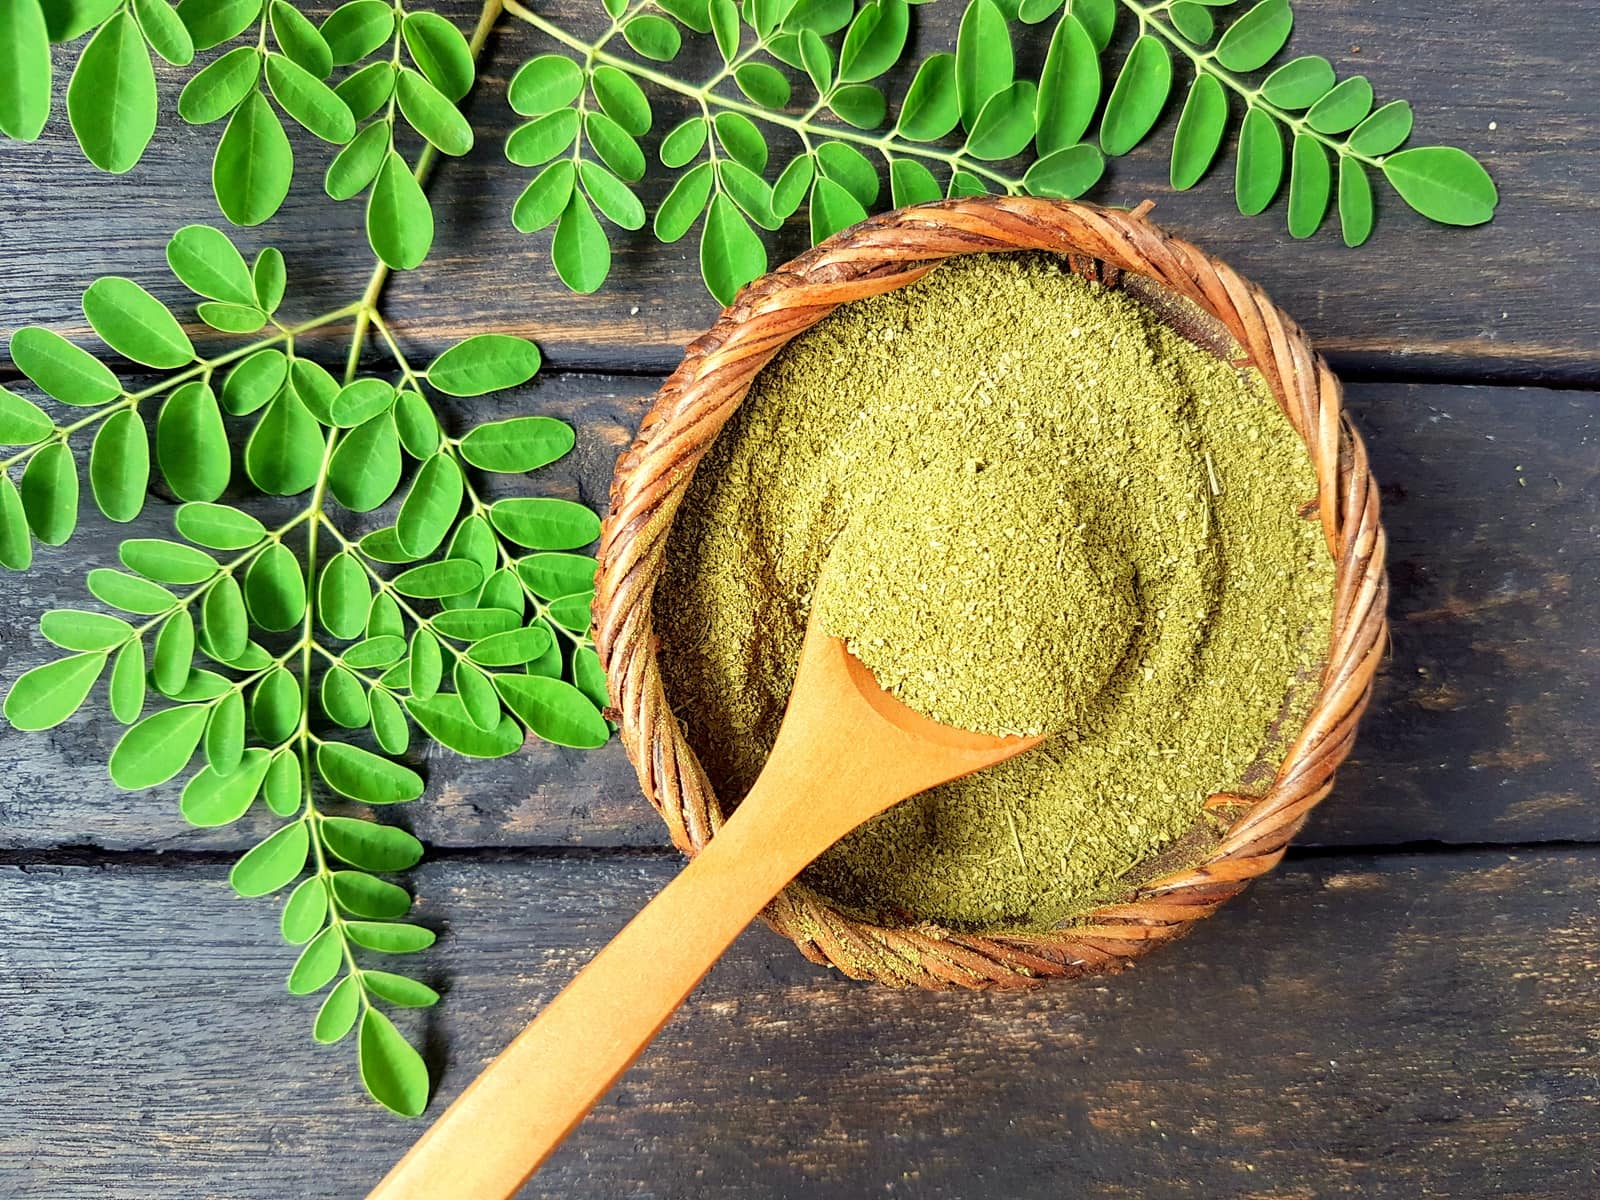 5 Benefits Of Moringa You Did Not Know About